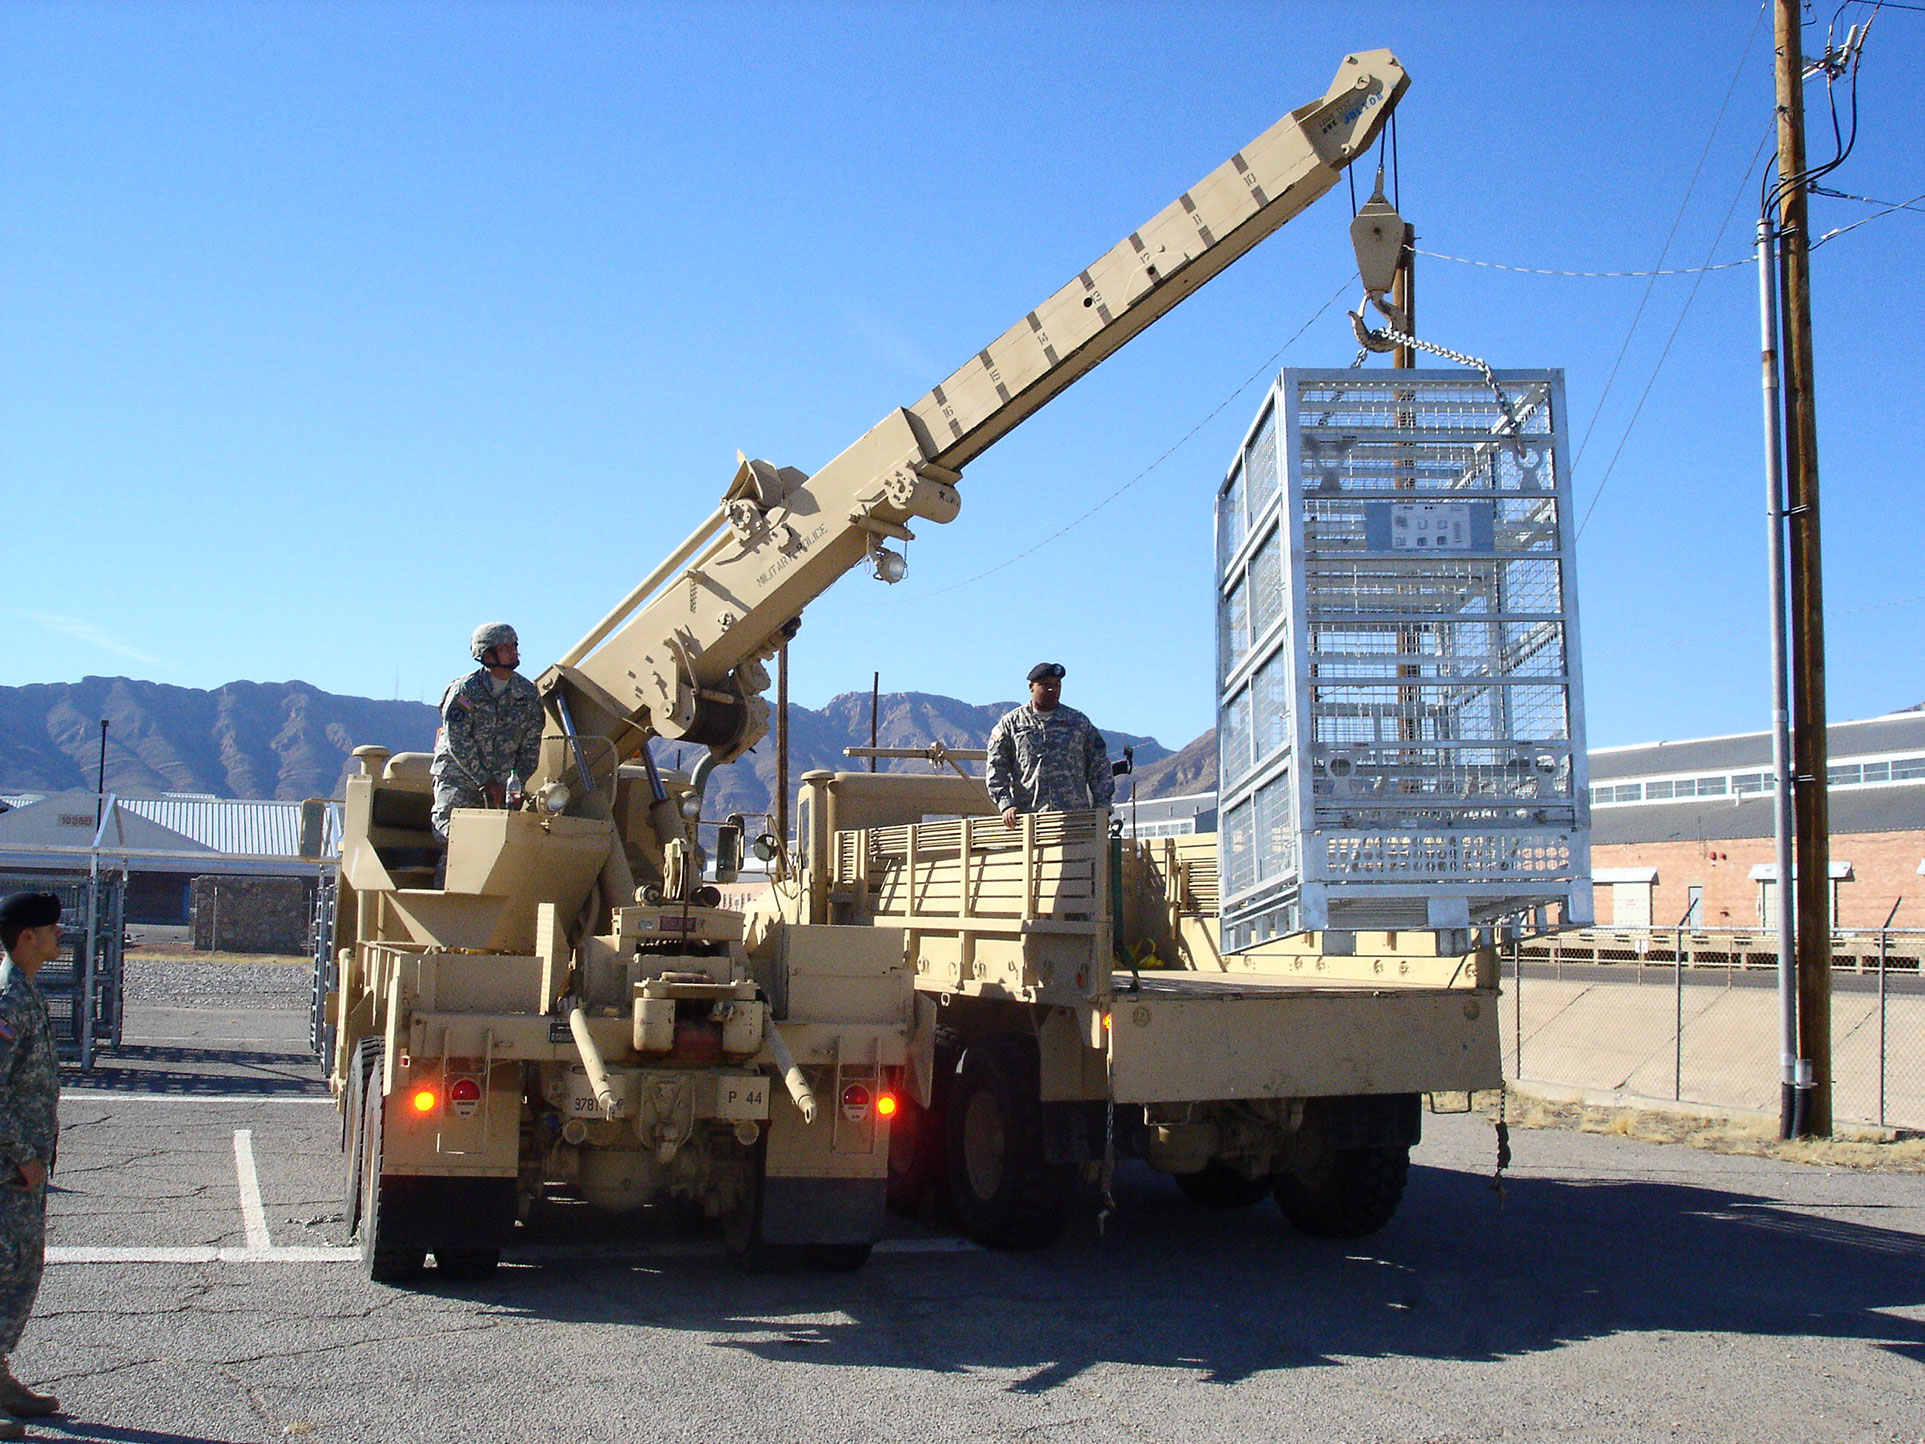 Deployable Military Container Being Sling-Loaded for Deployment